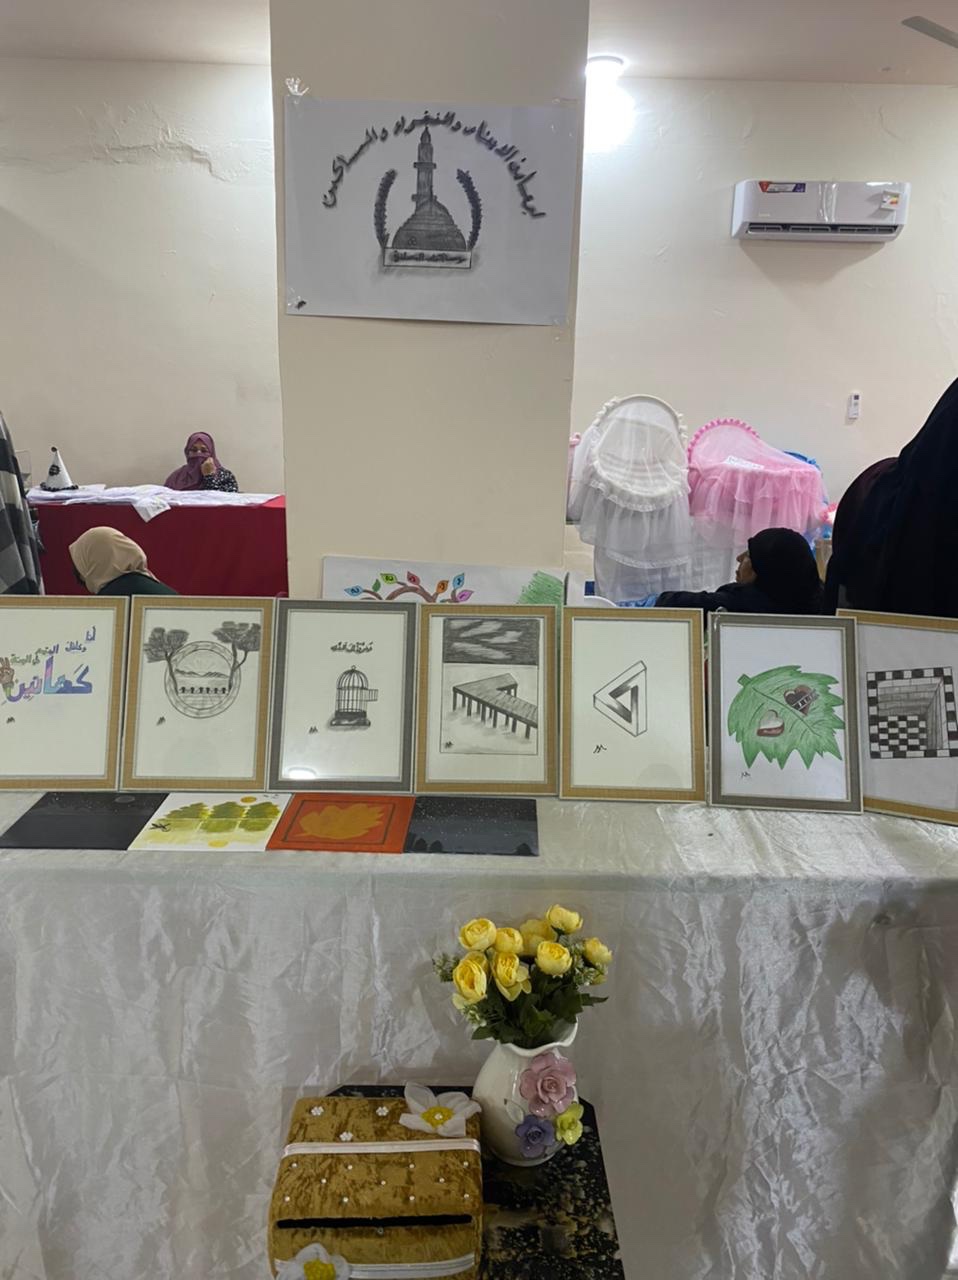 A visit to the charity bazaar of Al-Mustafa's Lovers Foundation